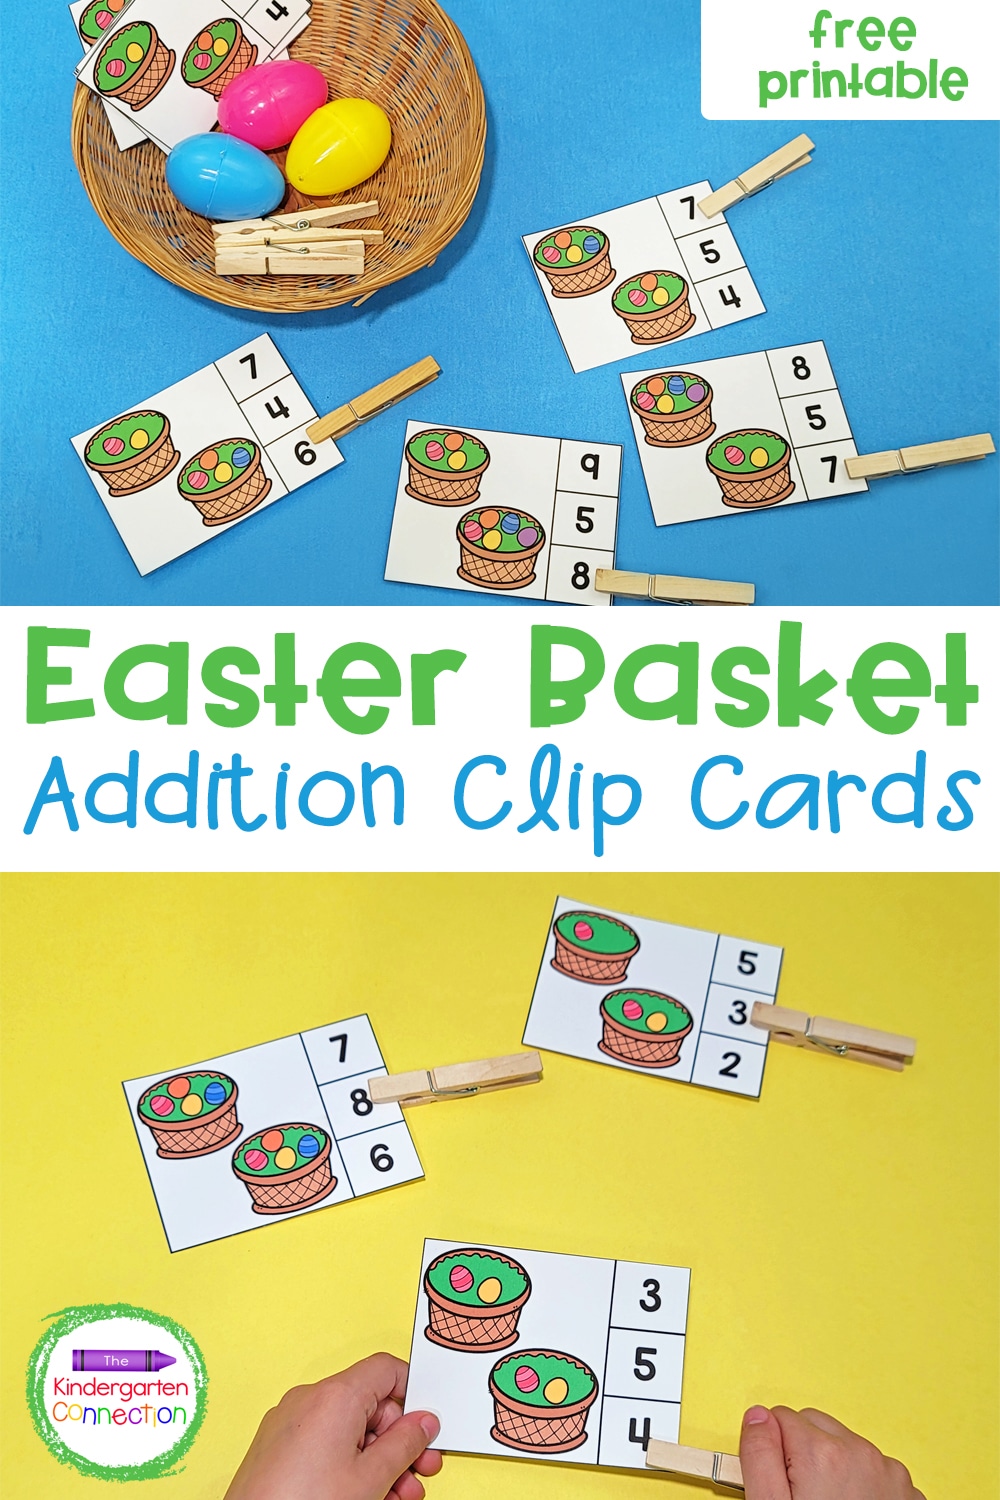 These free Spring Easter Basket Addition Clip Cards are perfect for Kindergarten morning tubs or math centers!